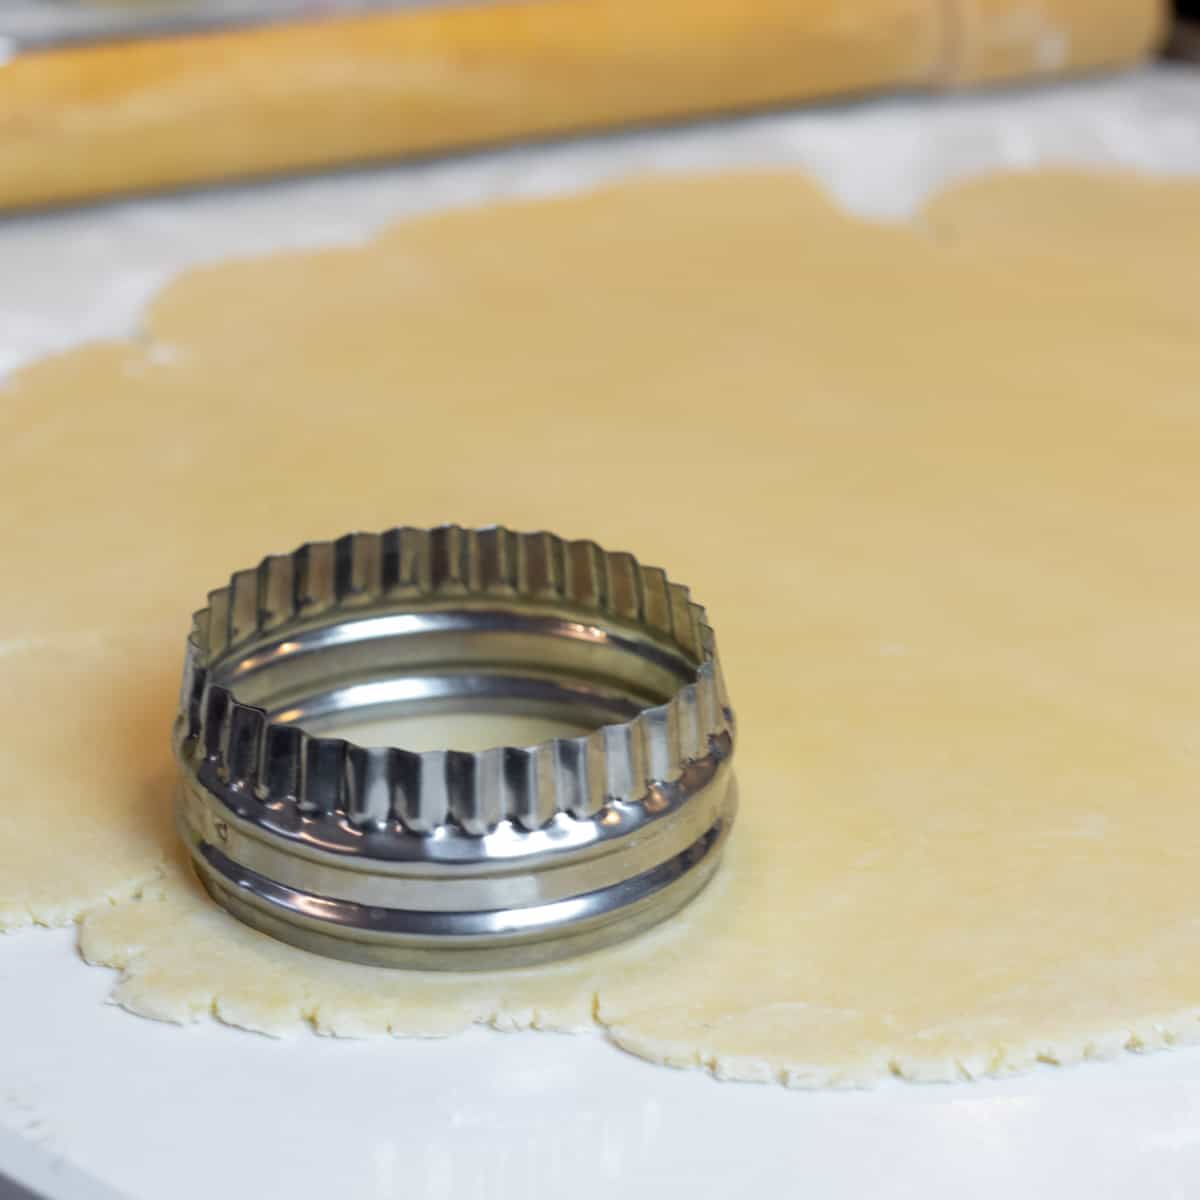 Cutting a circle out of rolled pastry dough.